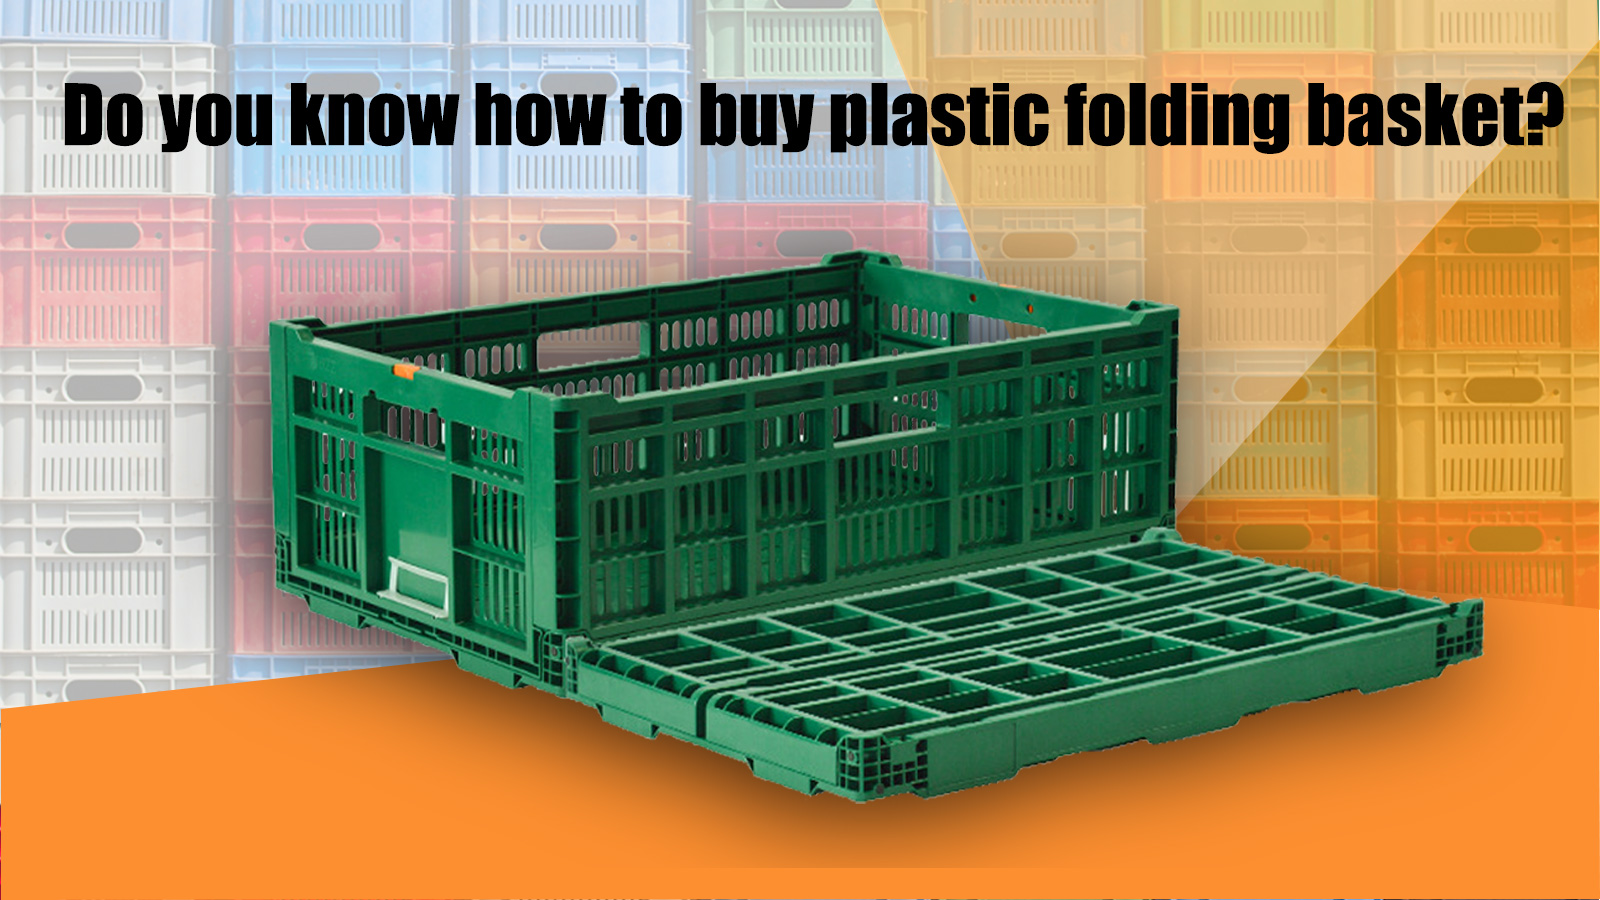 Do you know how to buy plastic folding basket?